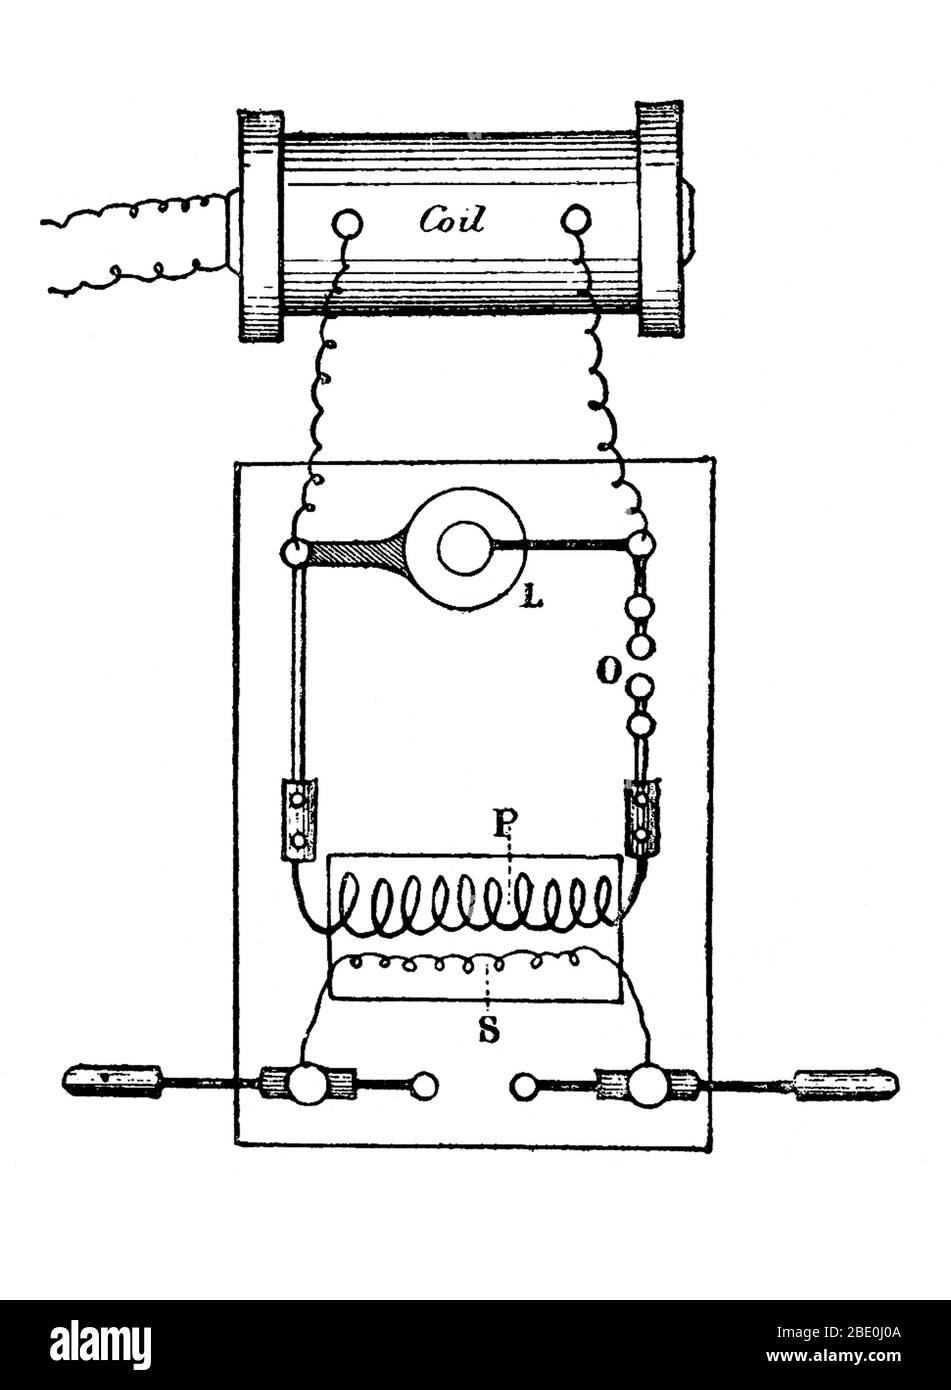 Apparatus for producing electricity of high potential and rapid alternation; L) Leyden jar, O) discharger, P) primary wire, S) secondary wire. Electrotherapy is the use of electrical energy as a medical treatment. In medicine, the term electrotherapy can apply to a variety of treatments, including the use of electrical devices such as deep brain stimulators for neurological disease. The term has also been applied specifically to the use of electric current to speed wound healing. The first medical treatments with electricity in London have been recorded as far back as 1767 at Middlesex Hospita Stock Photo